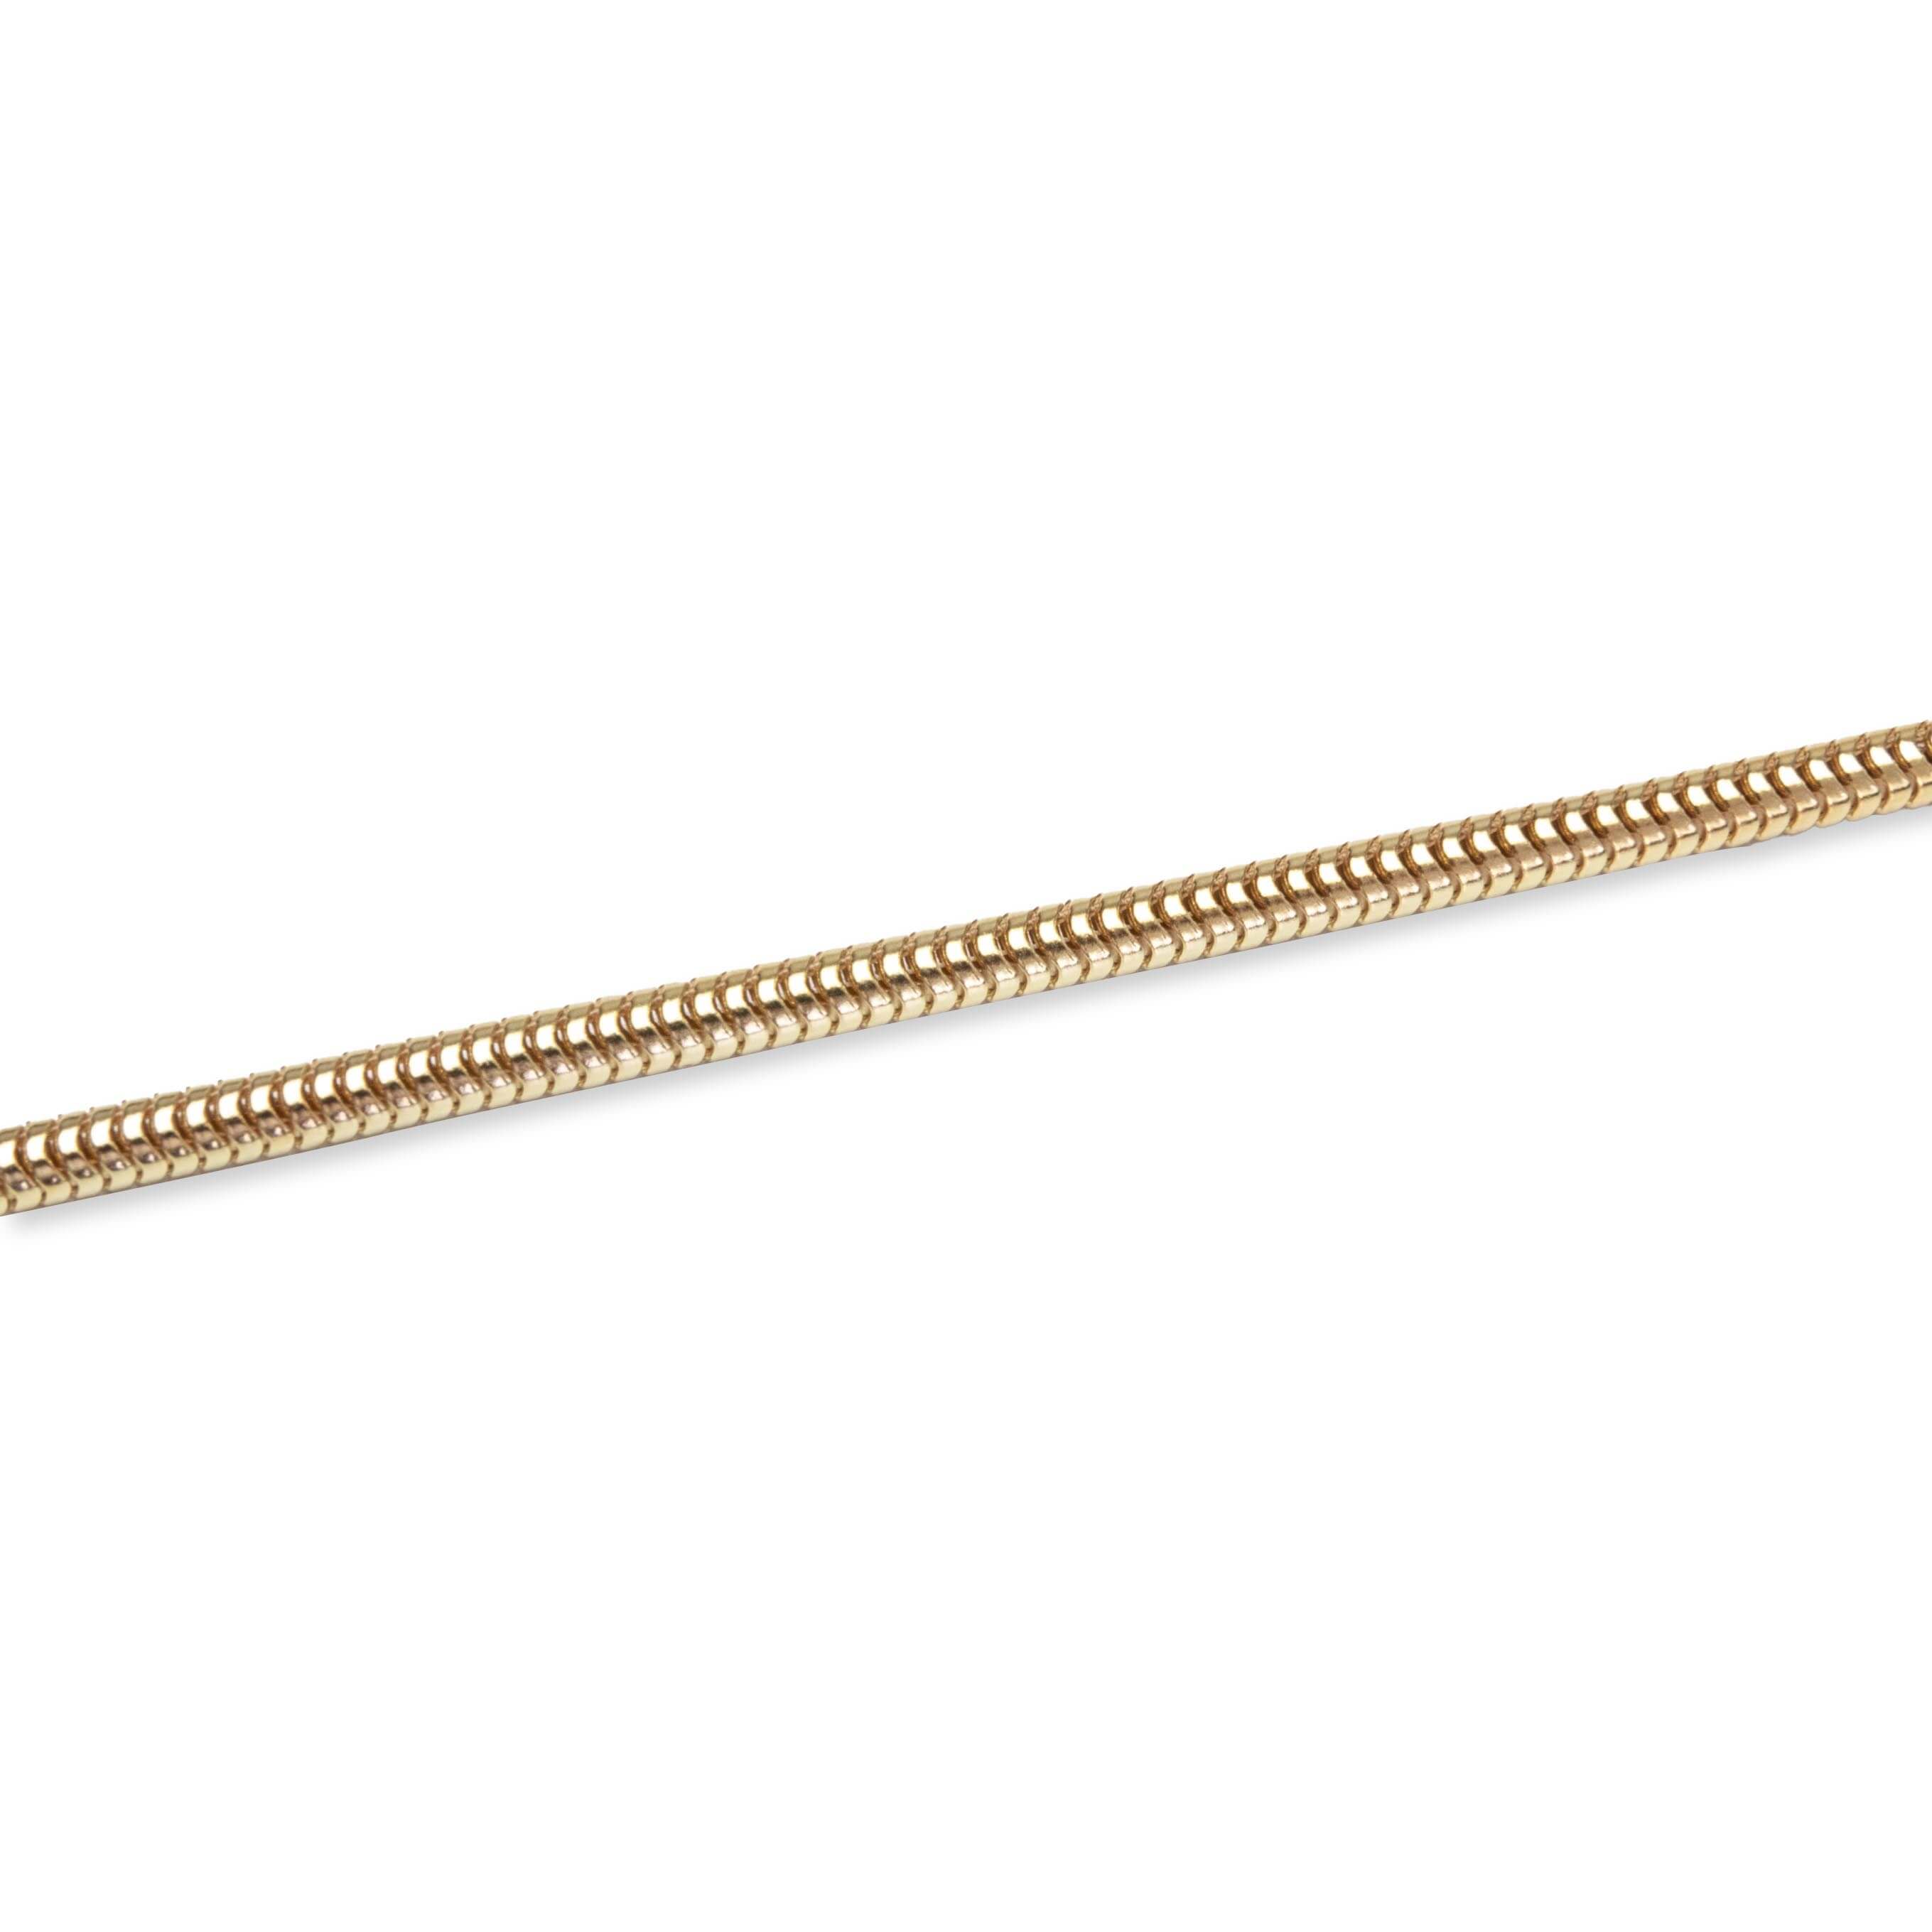 Snake Chain Gold - S925 Sterling Silver with 18K Gold Plating, , large image number null